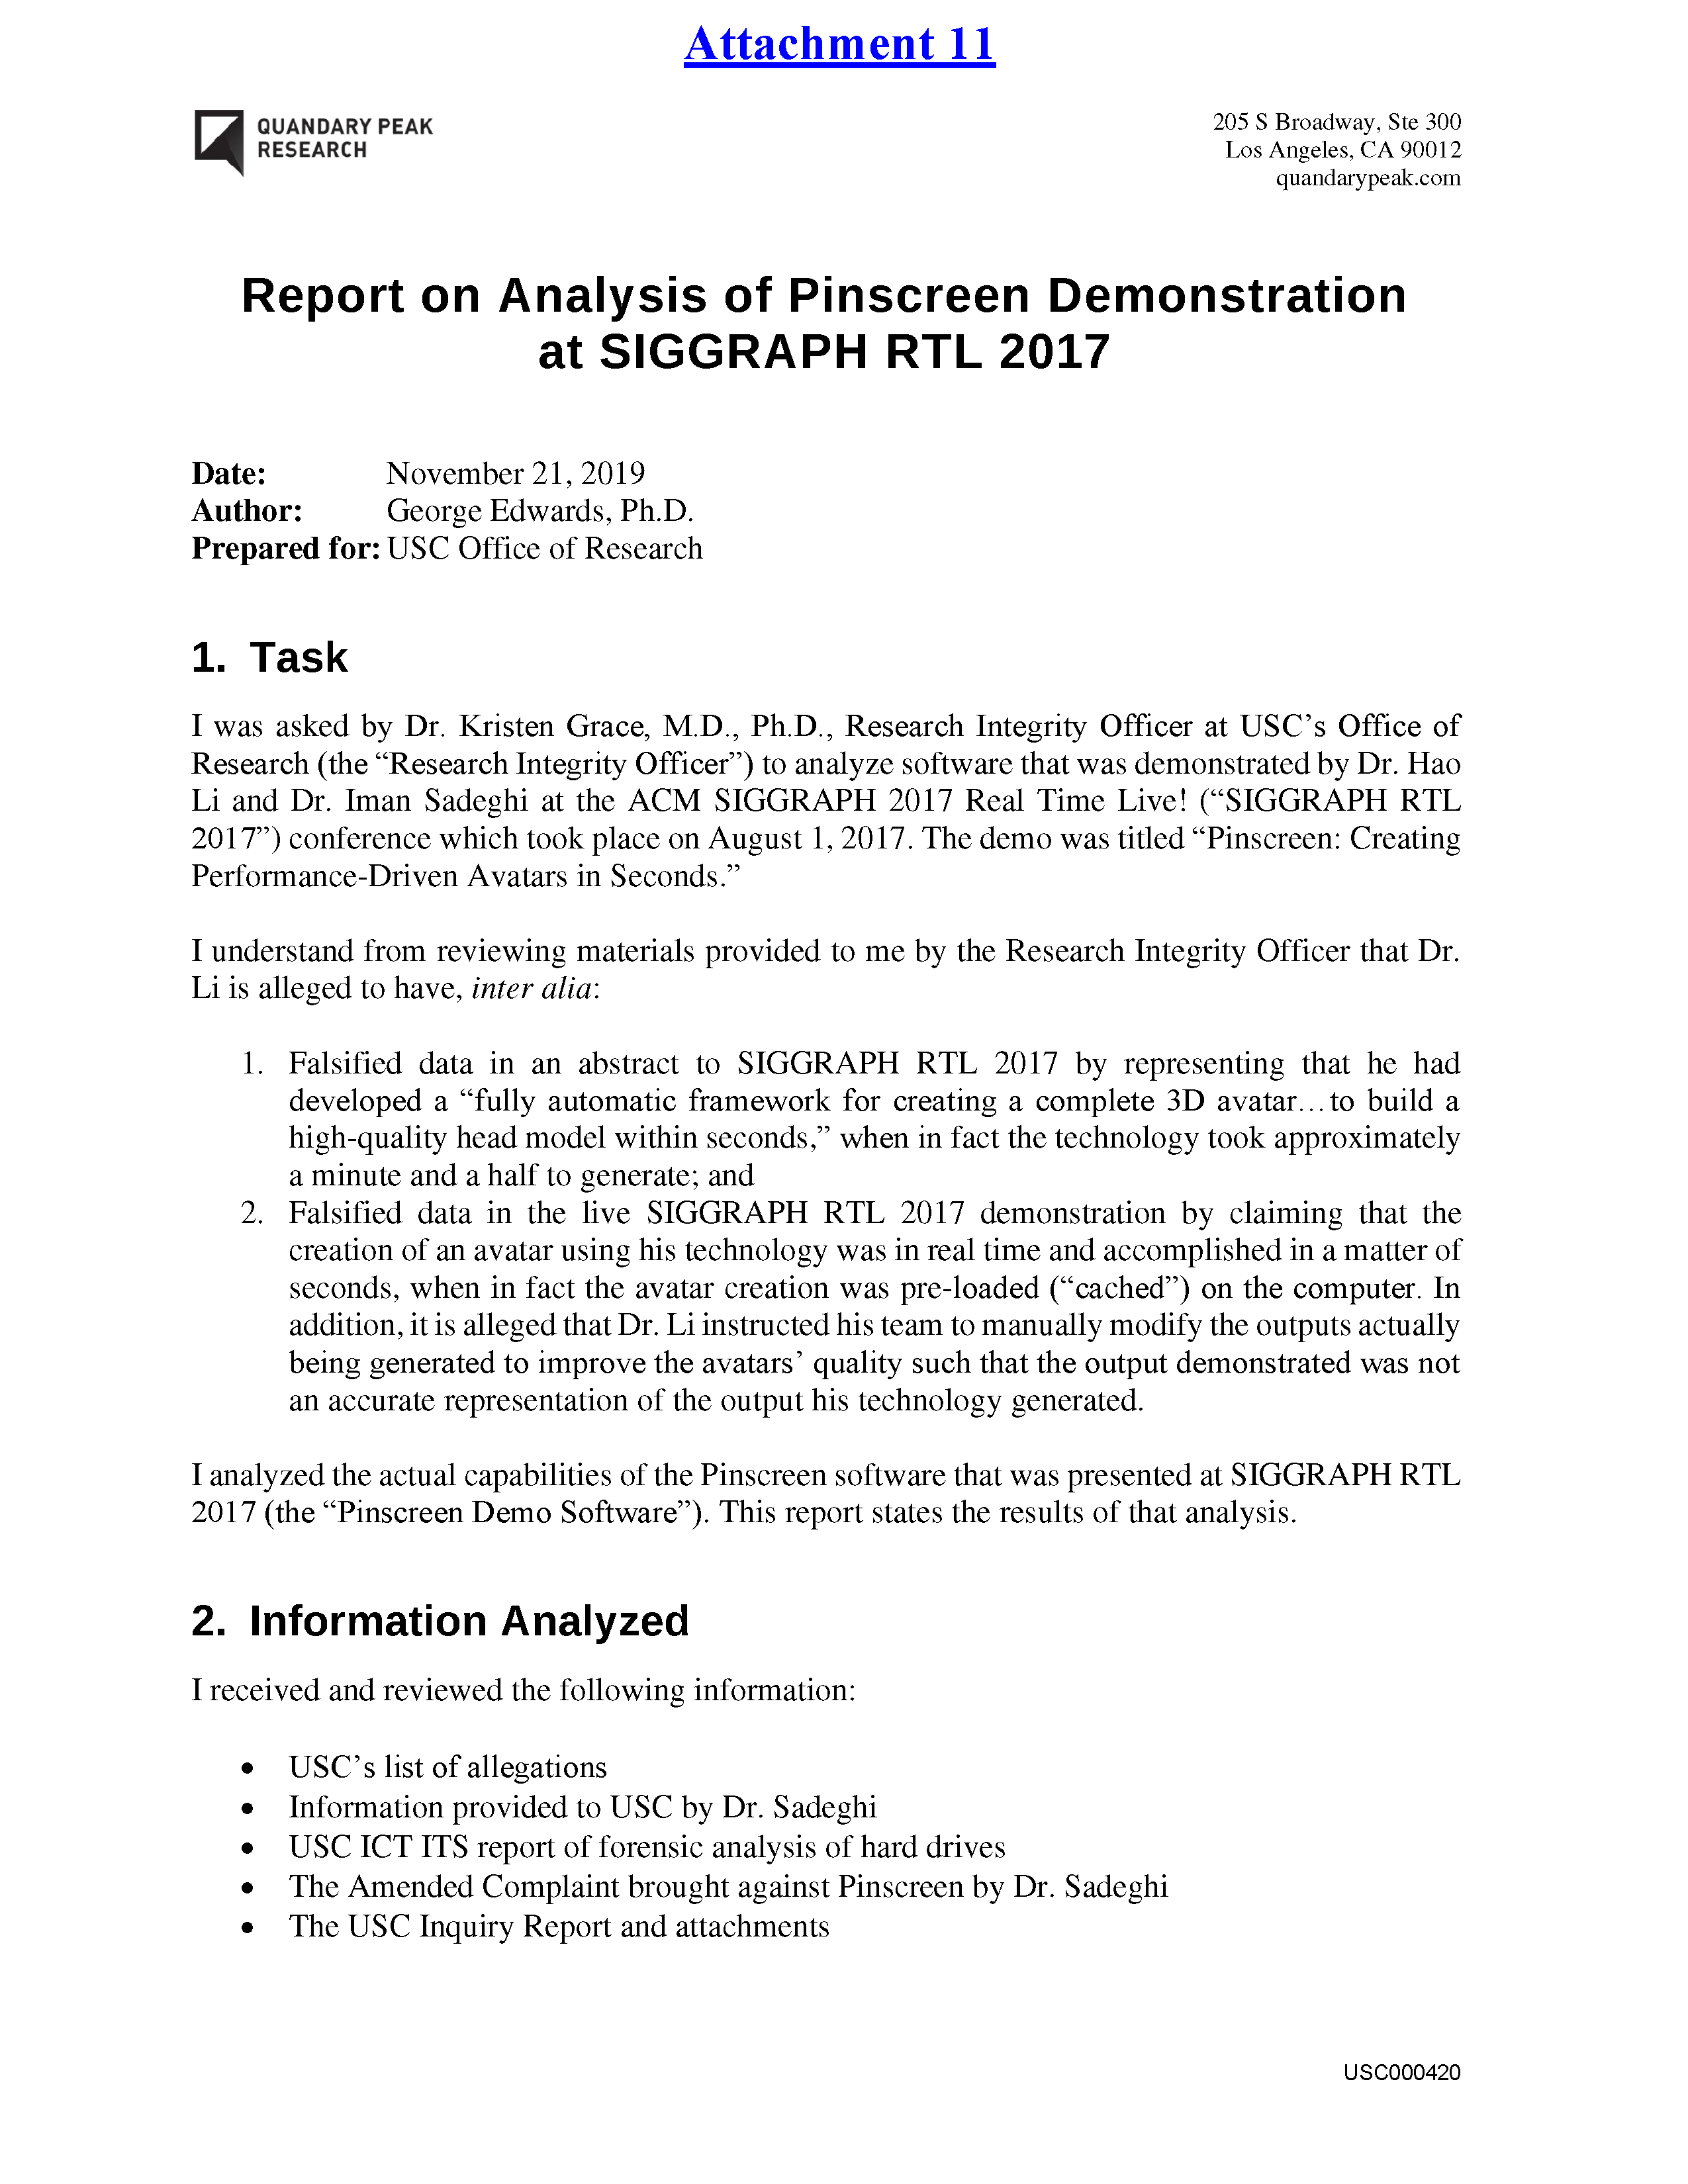 USC's Investigation Report re Hao Li's and Pinscreen's Scientific Misconduct at ACM SIGGRAPH RTL 2017 [Summary] Page 68